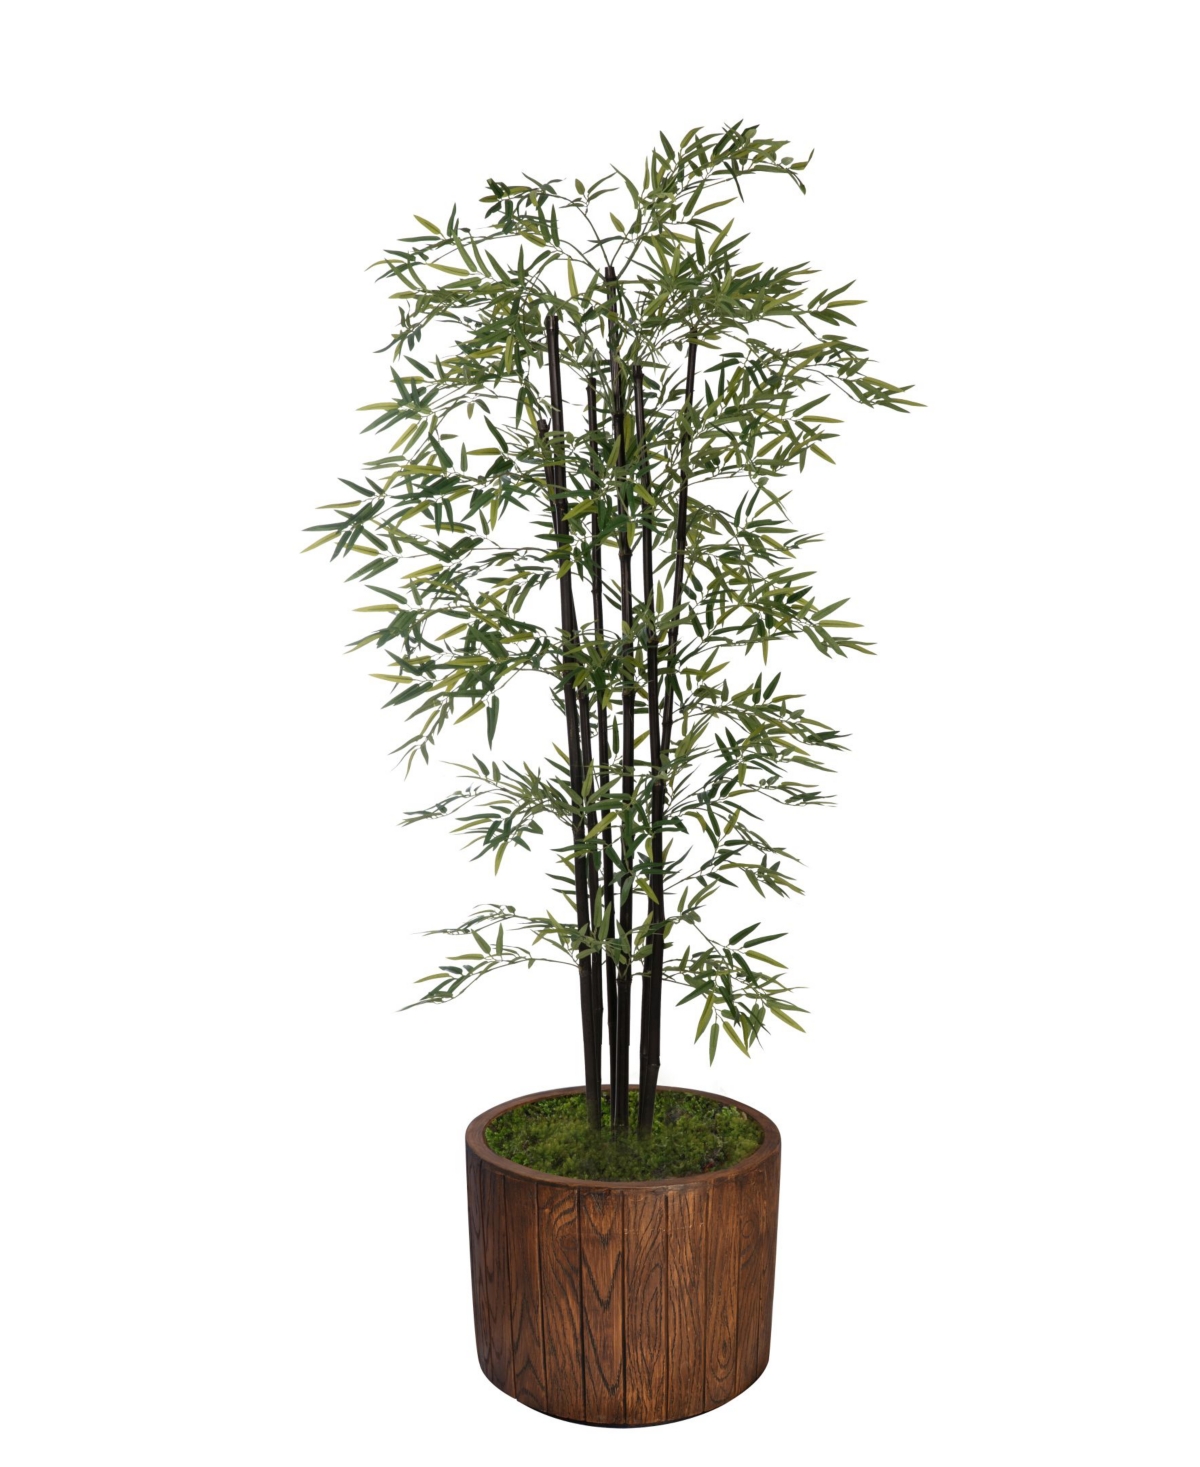 77" Tall Bamboo Tree With Decorative Black Poles and Fiberstone Planter - Green